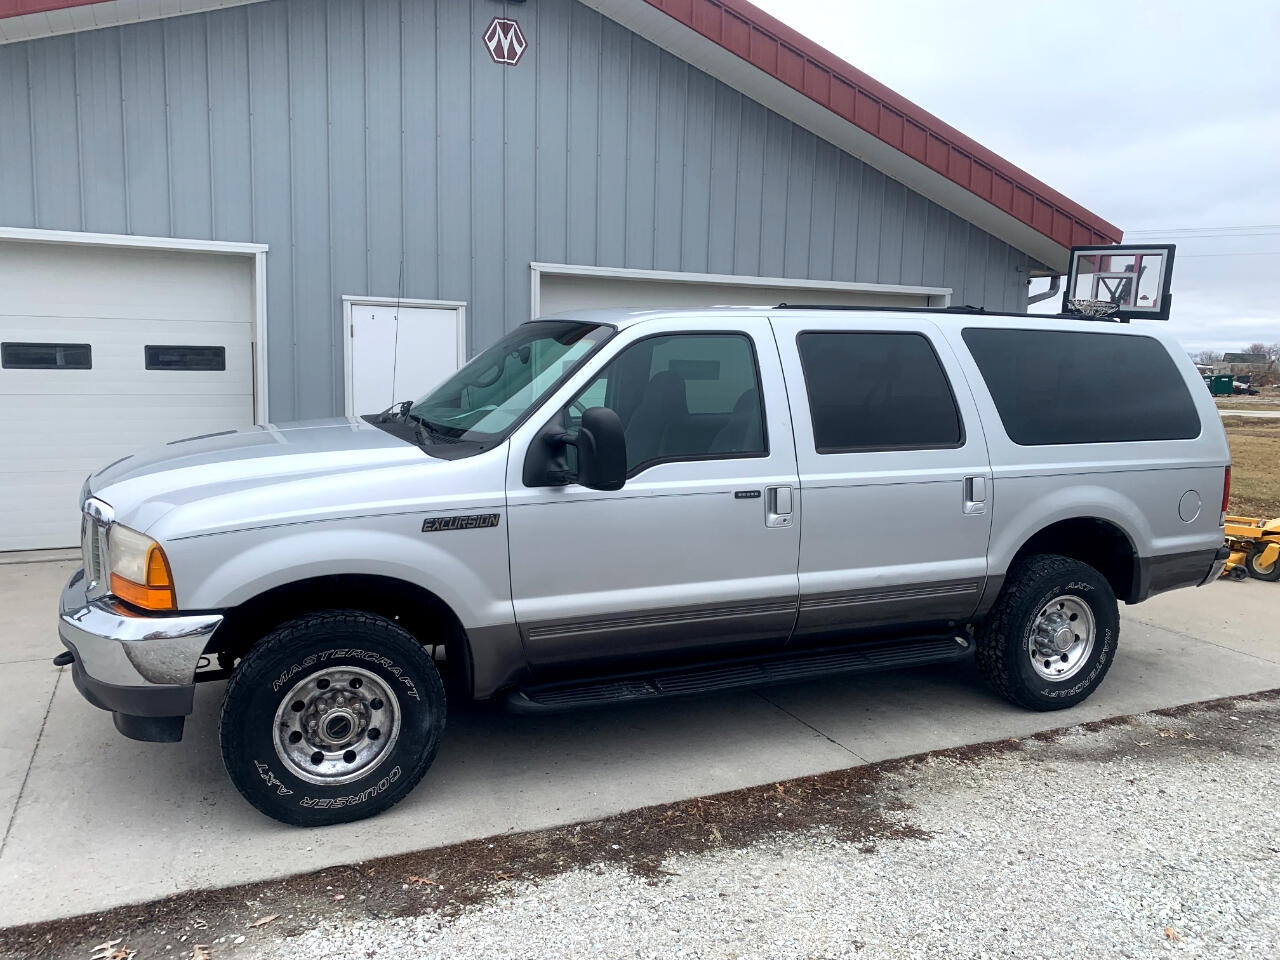 Used 2001 Ford Excursion XLT 4WD for Sale in Macomb IL 61455 Car Care Center